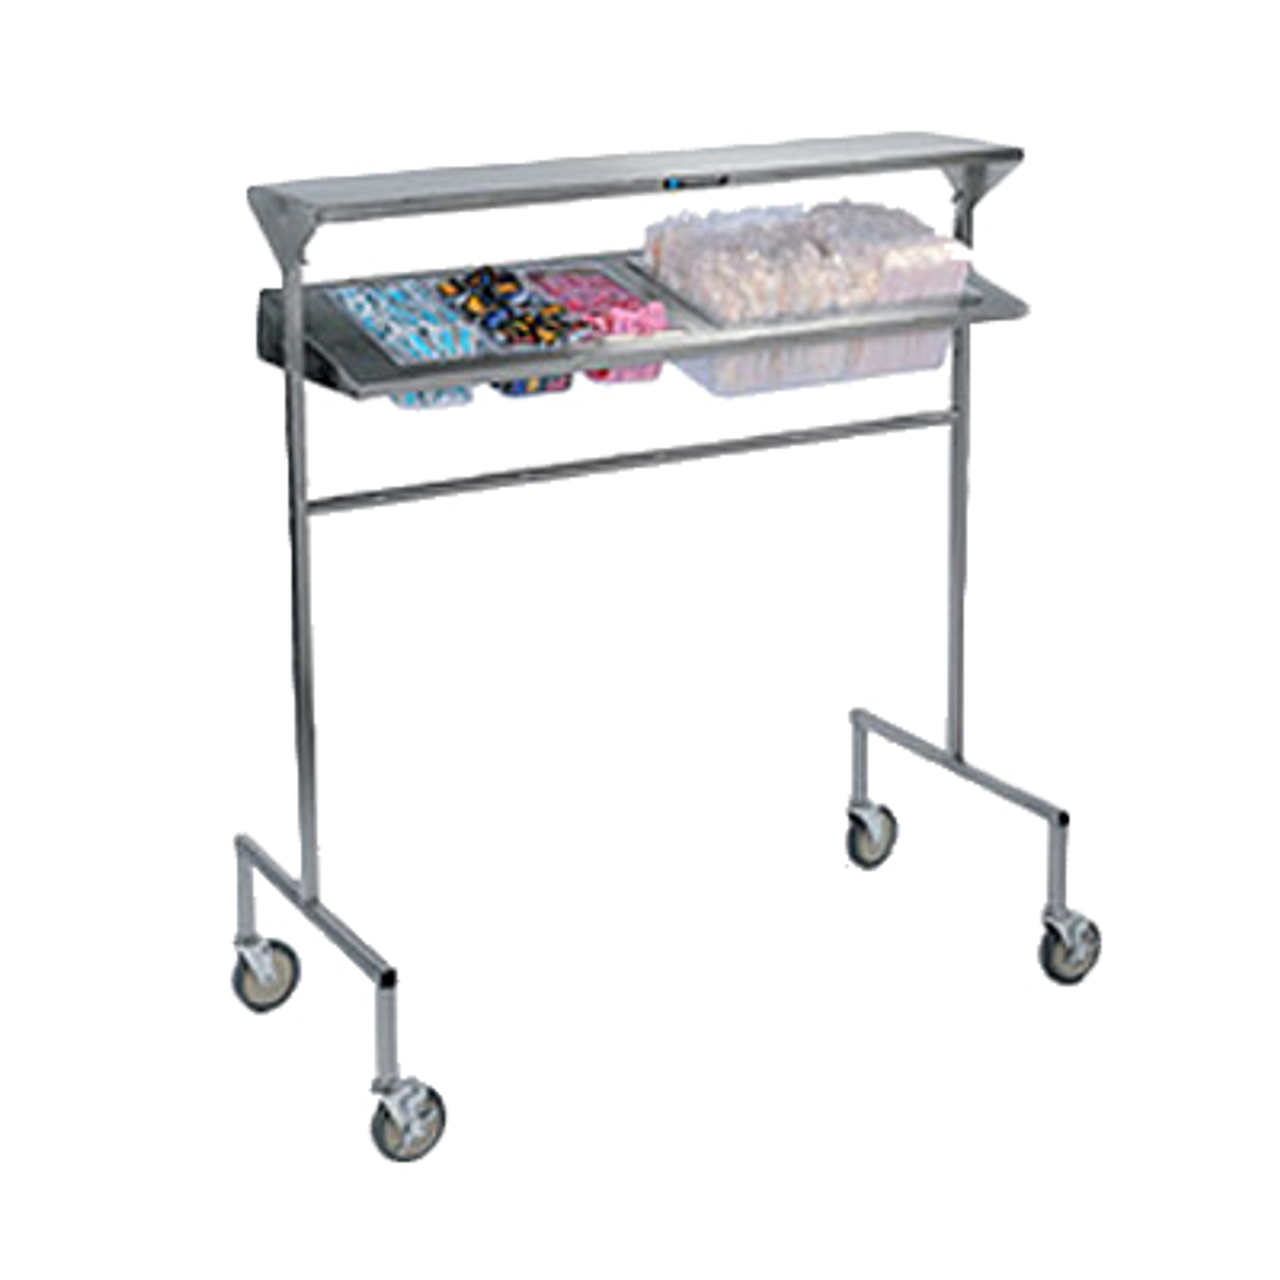 Tray Starter Station, mobile, designed to position over conveyor, solid top shelf, angled stainless steel panel with cutouts that hold full, 1/2 & 1/3 size food pans (not included), stainless steel construction, 5" swivel casters (2) with brakes, NSF, Made in USA